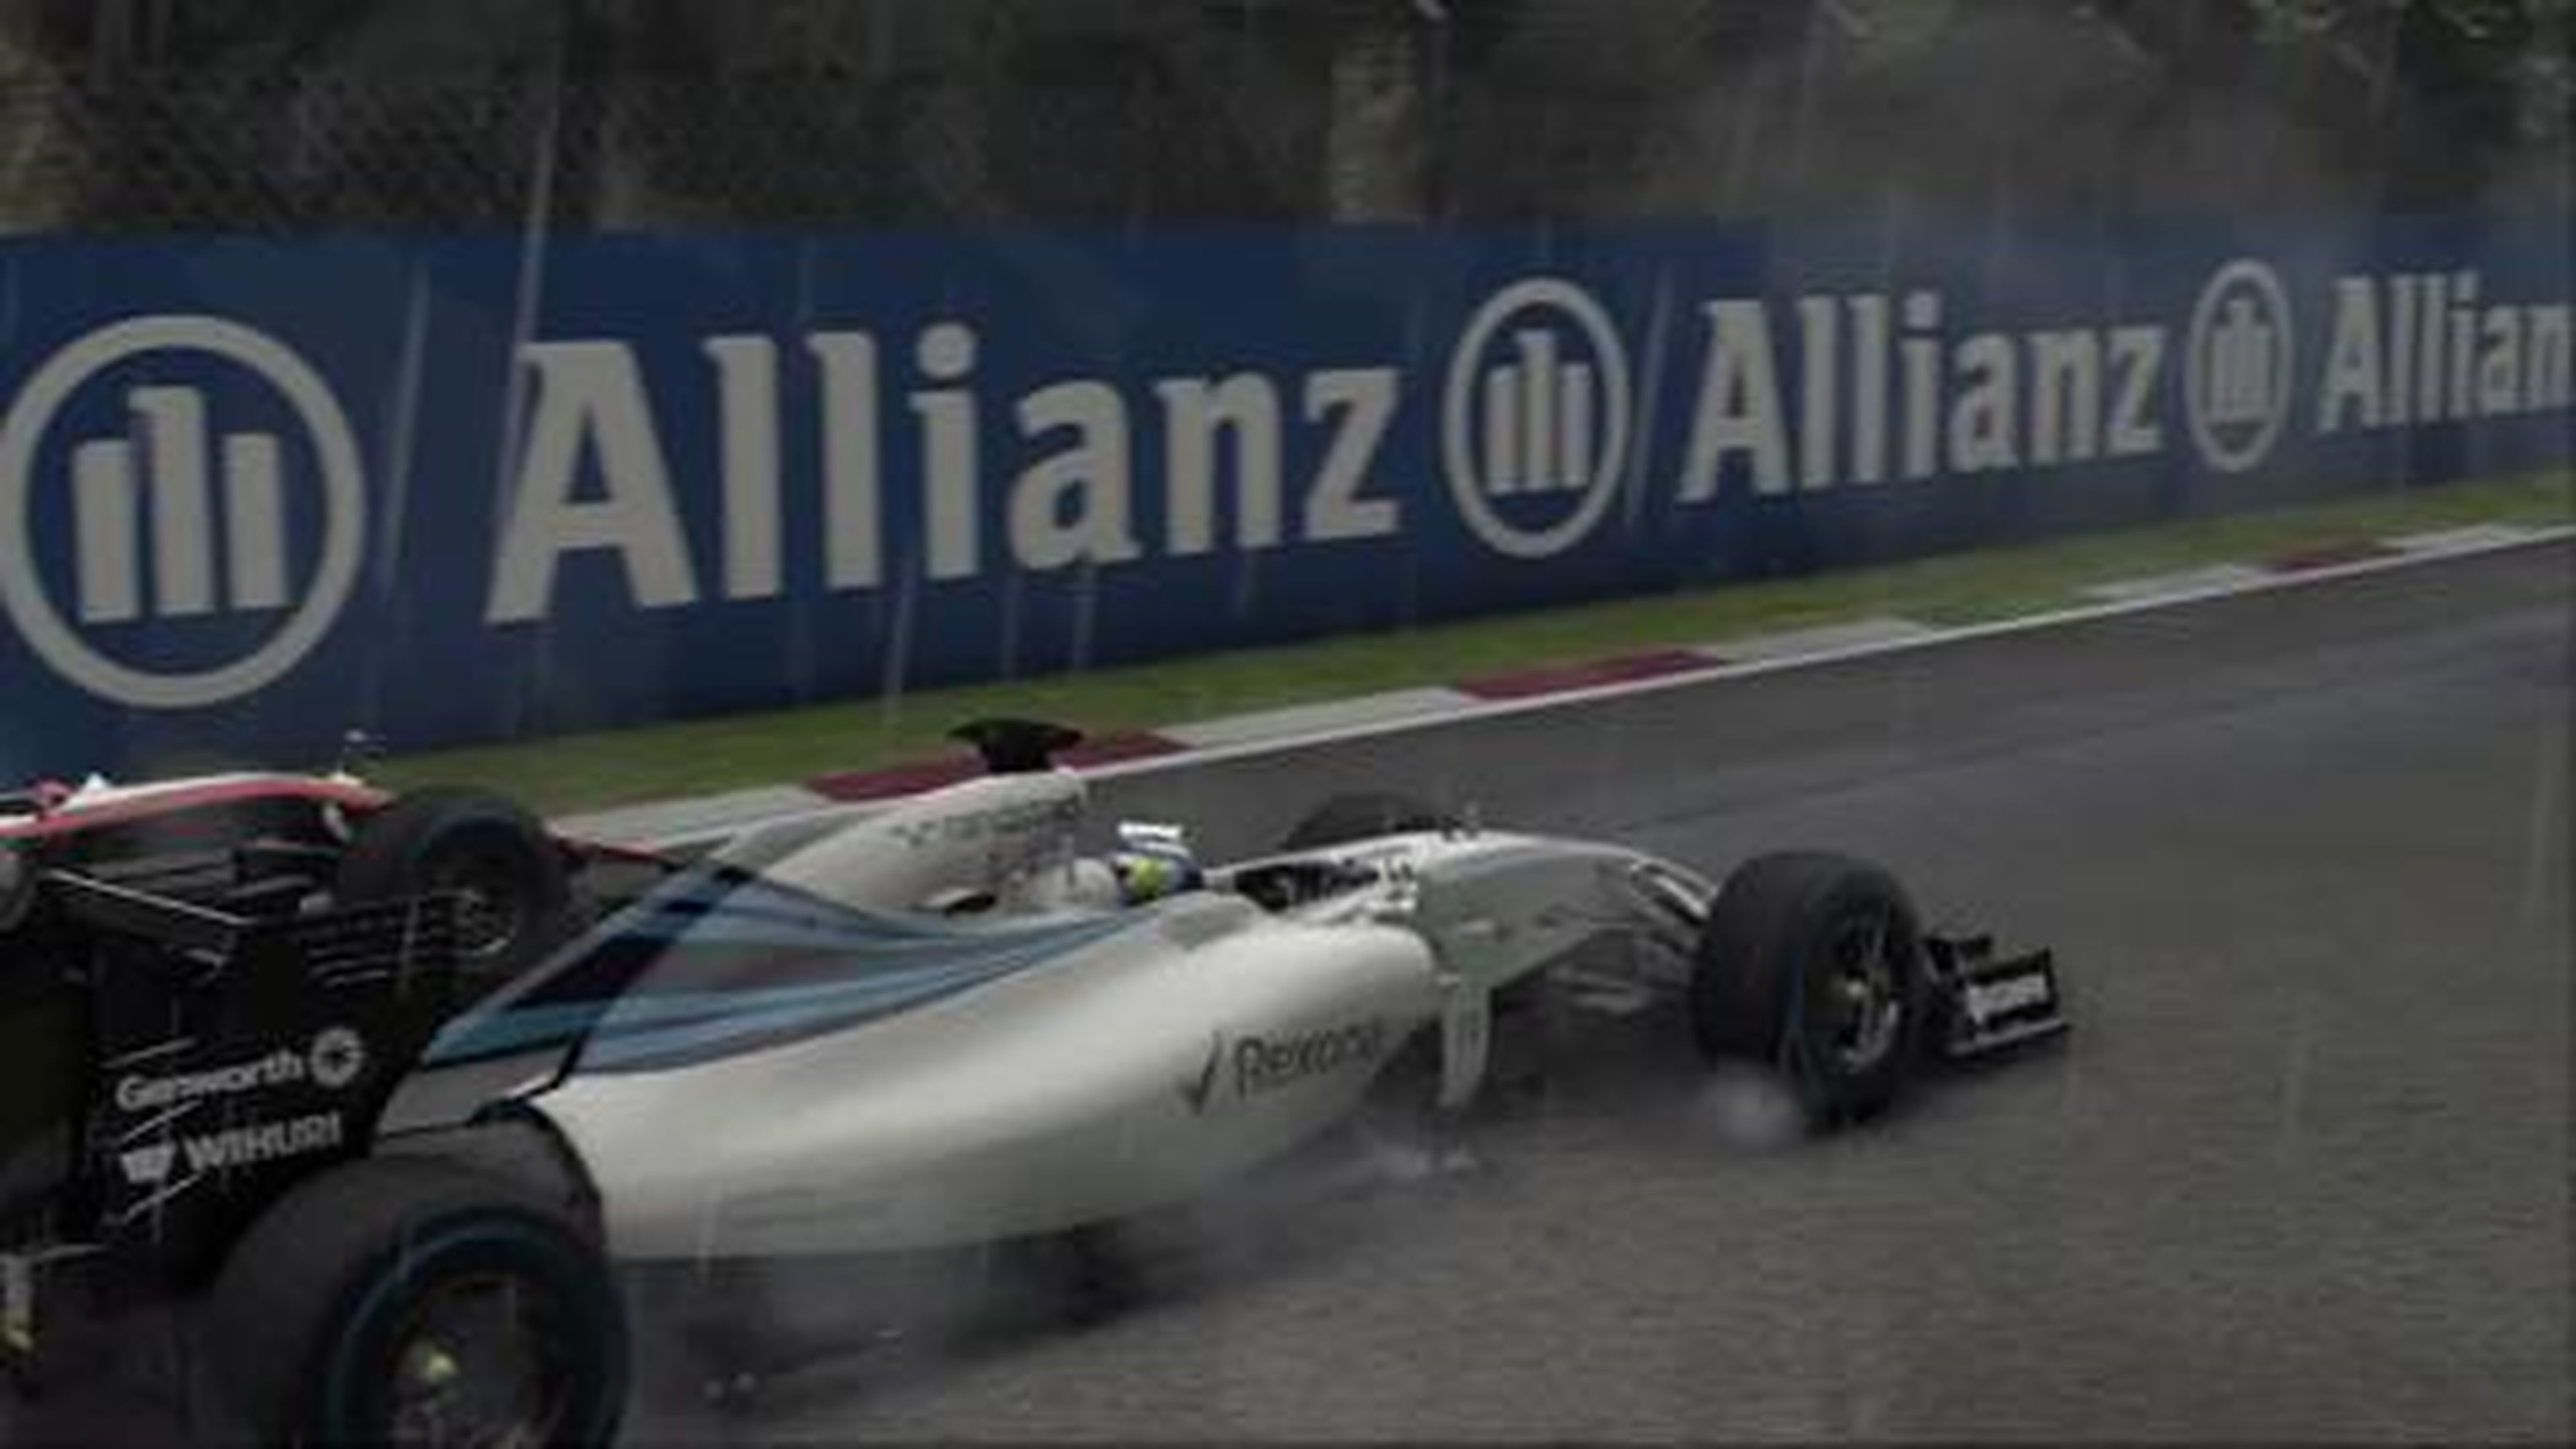 F1 2015 - PS4-XB1-PC - Your race begins (Spanish Trailer)